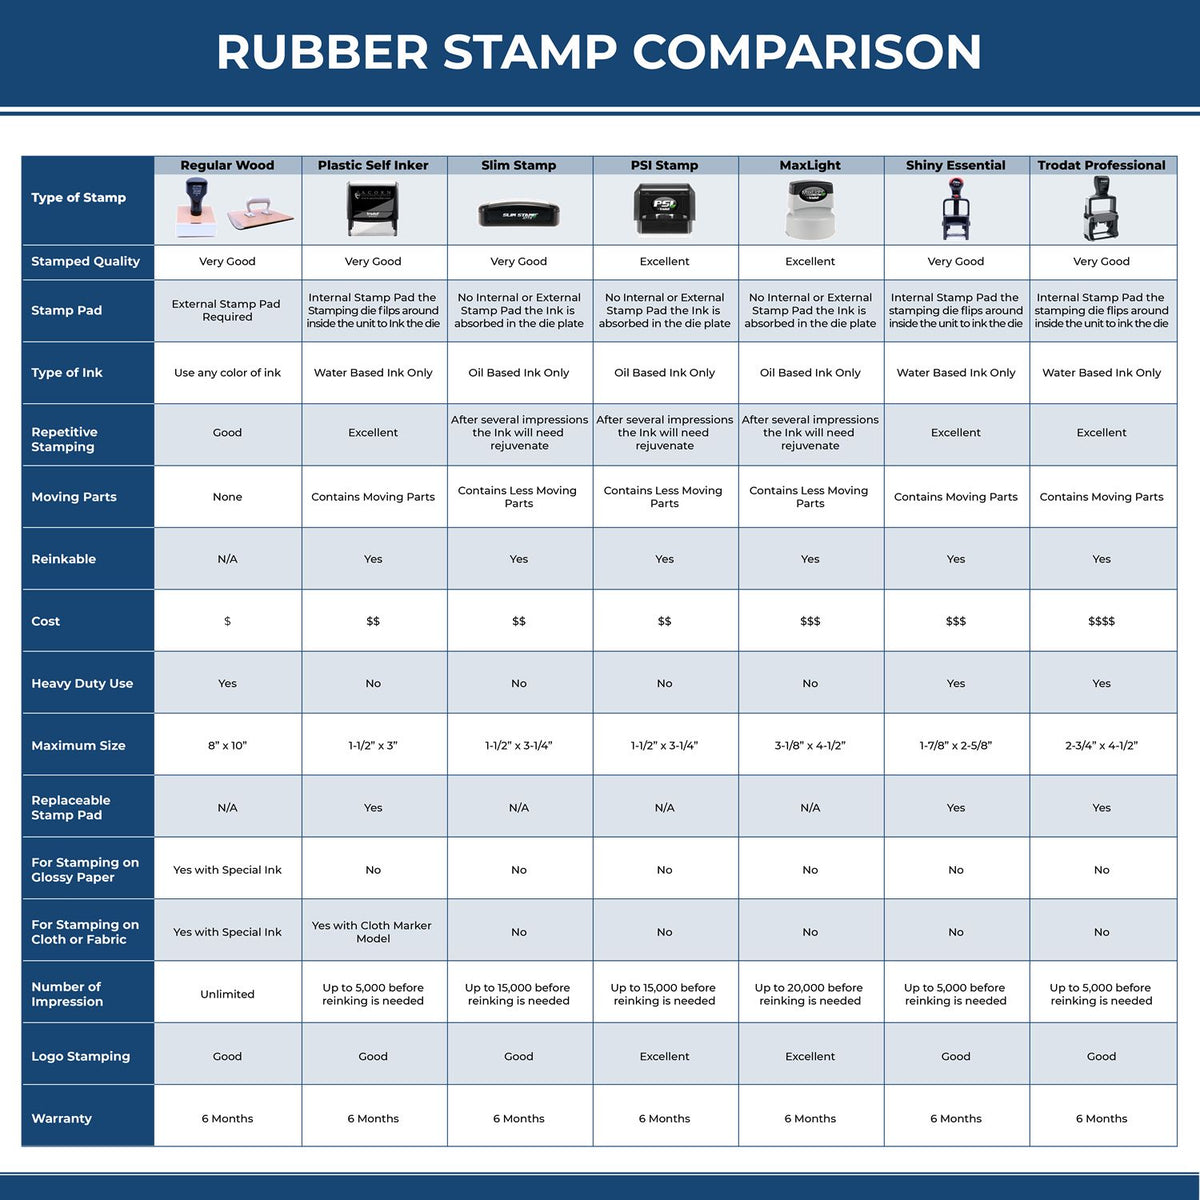 Large Printed Matter Rubber Stamp 4912R Rubber Stamp Comparison